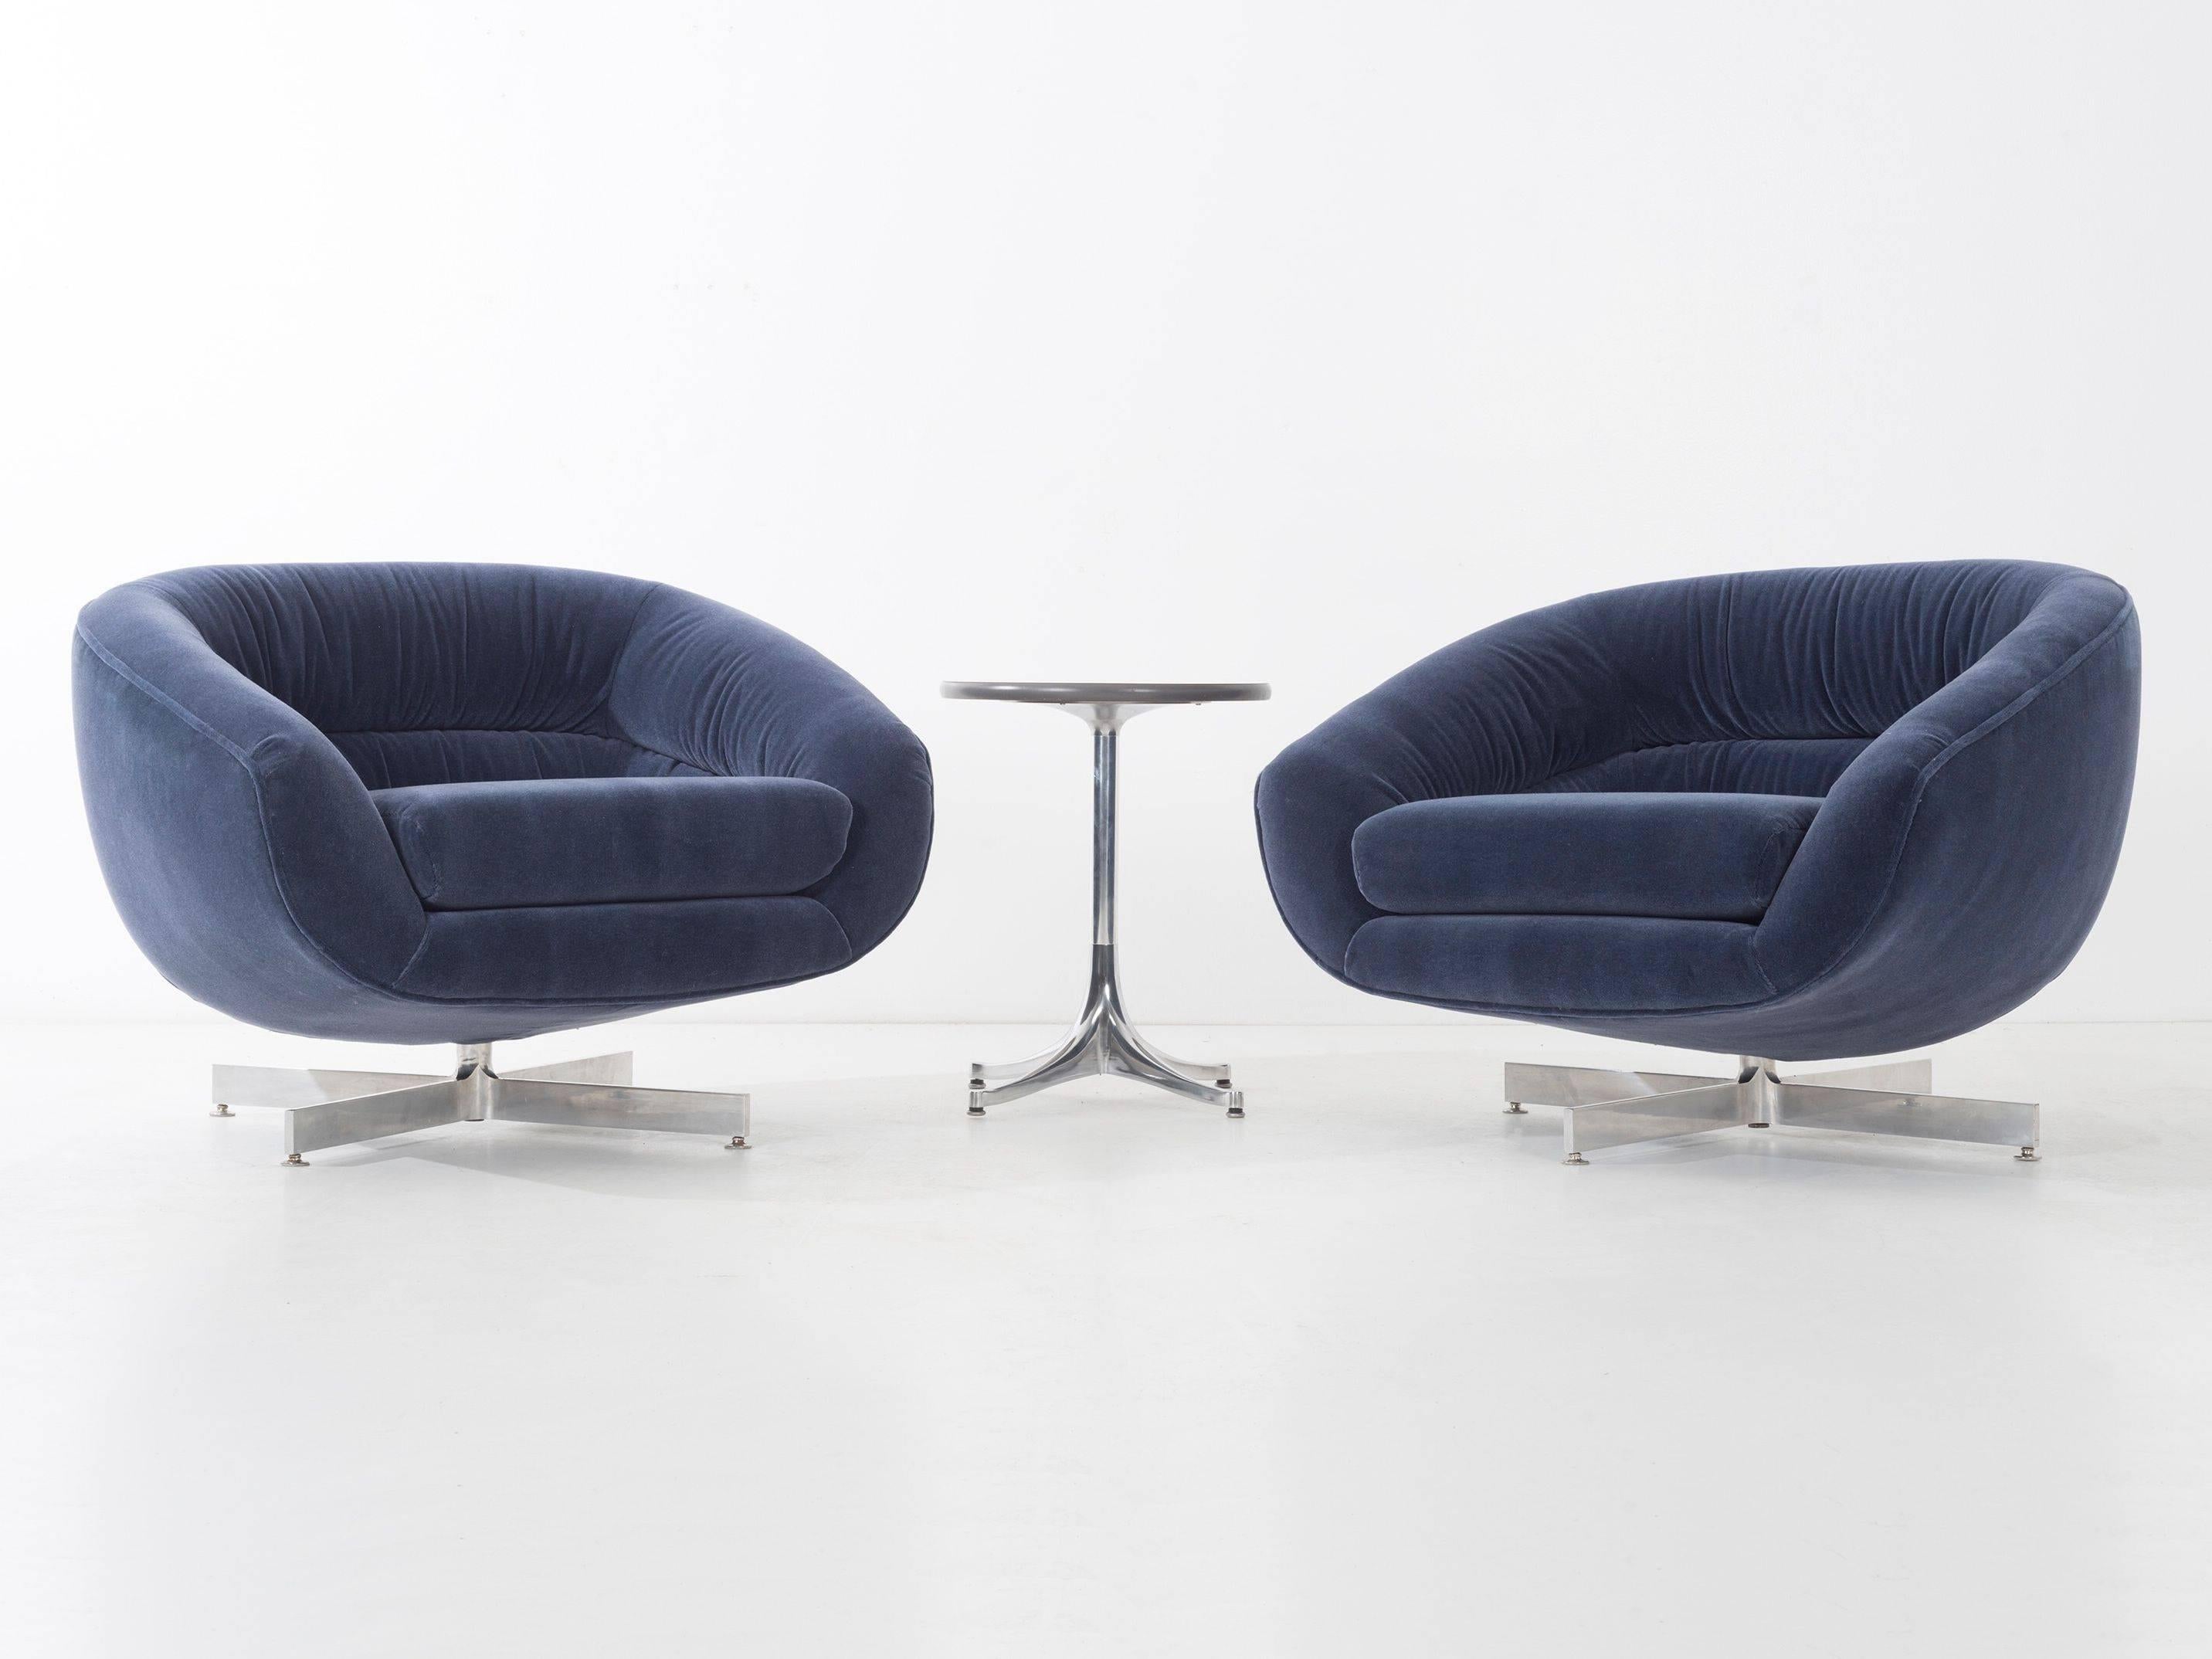 Channeled tub chairs. Features tilt swivel solid aluminum bases. Upholstered in navy blue mohair.